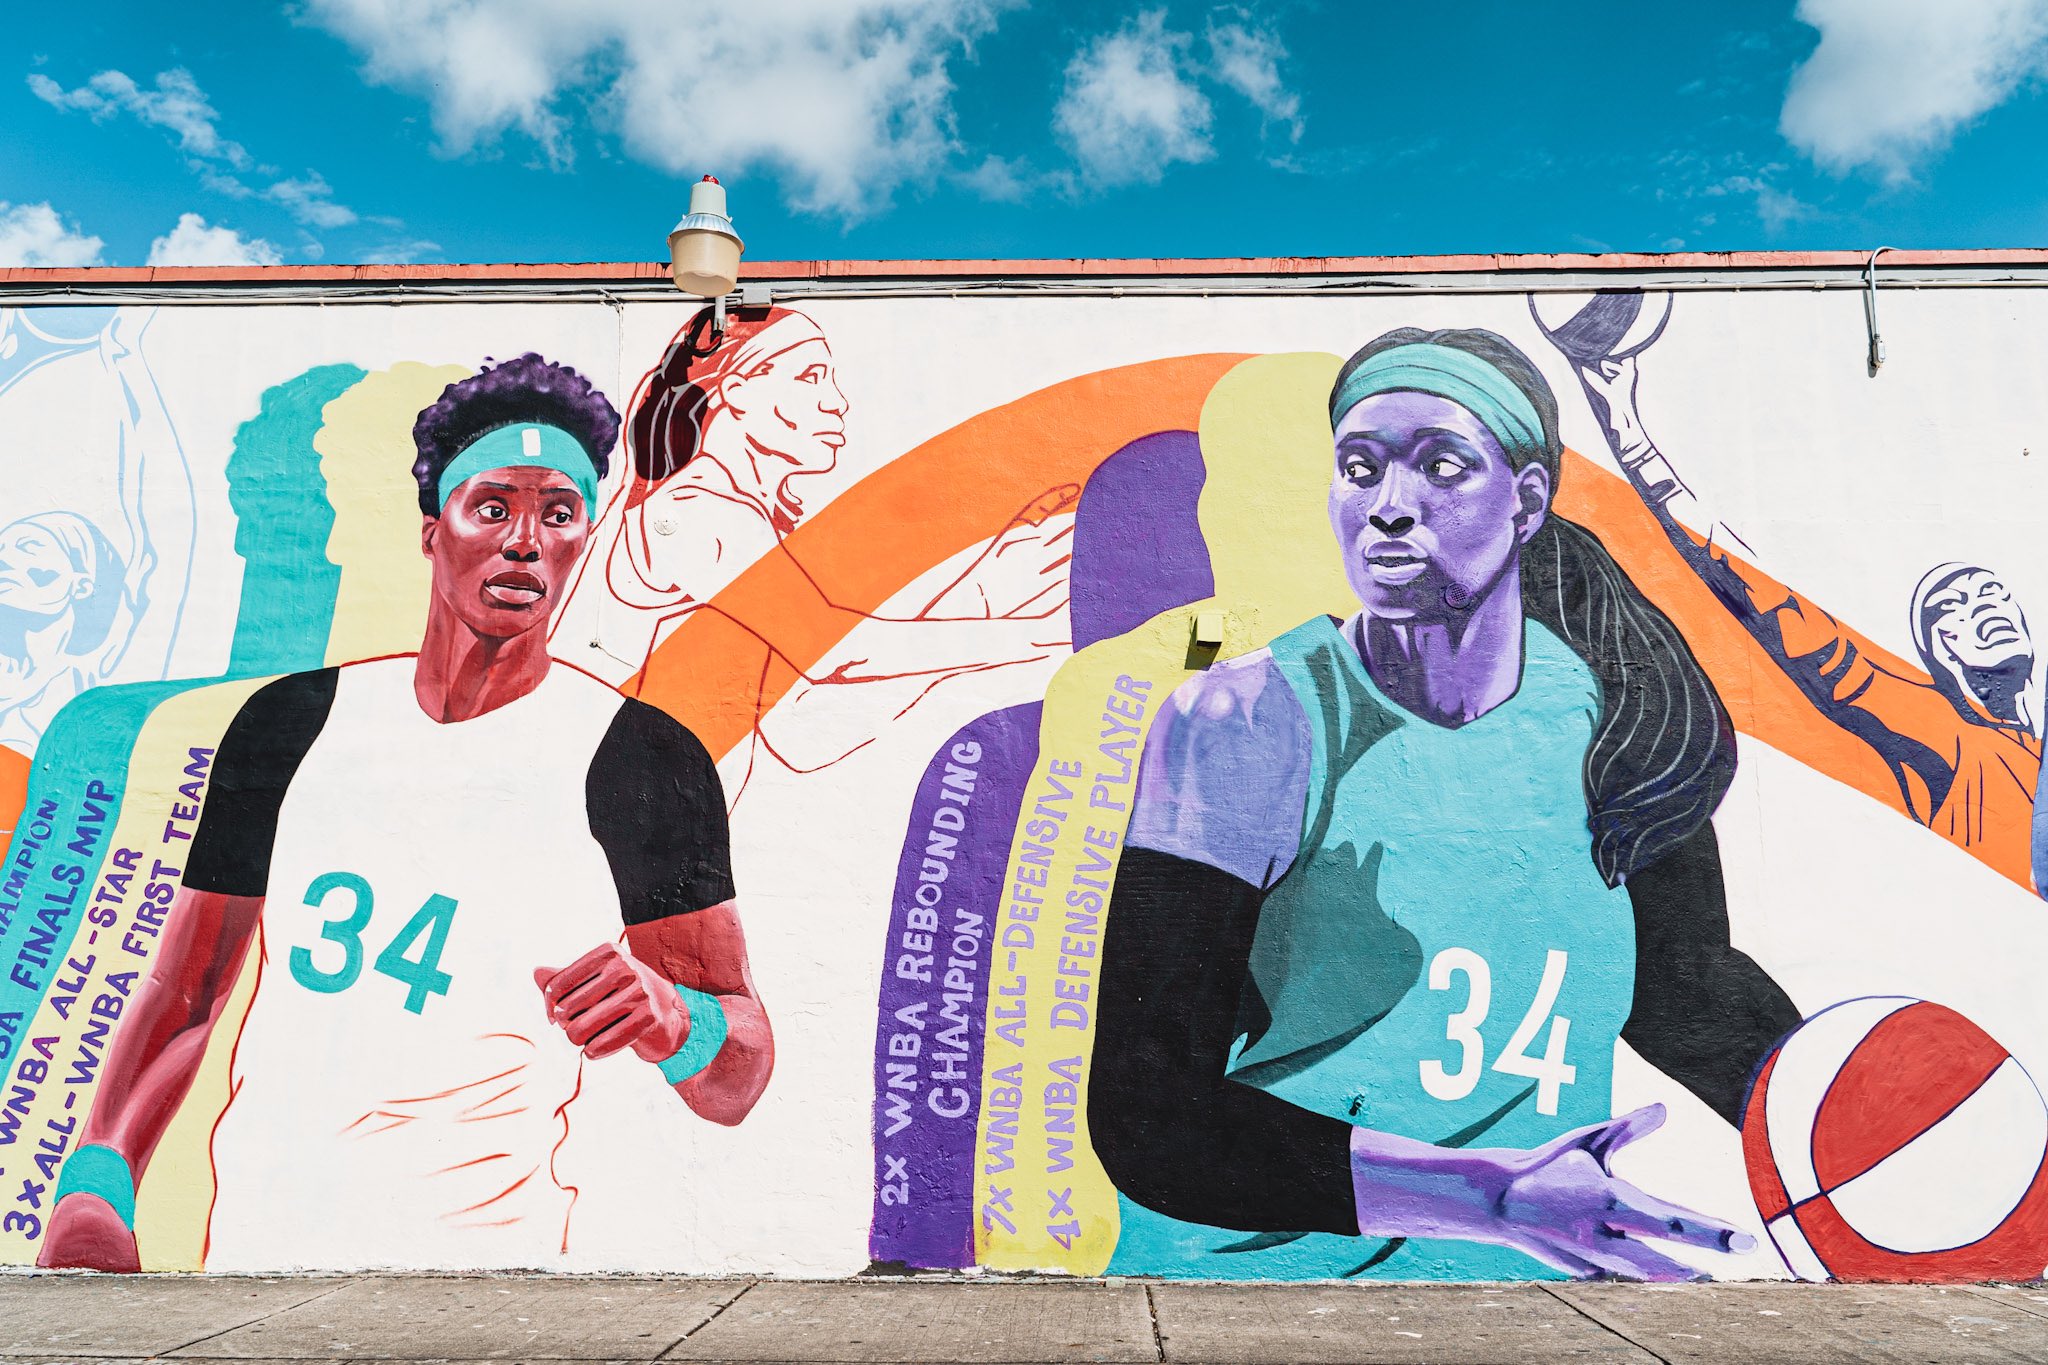 Sylvia Fowles receives tribute mural in her hometown from Bleacher Report/HighlightHER